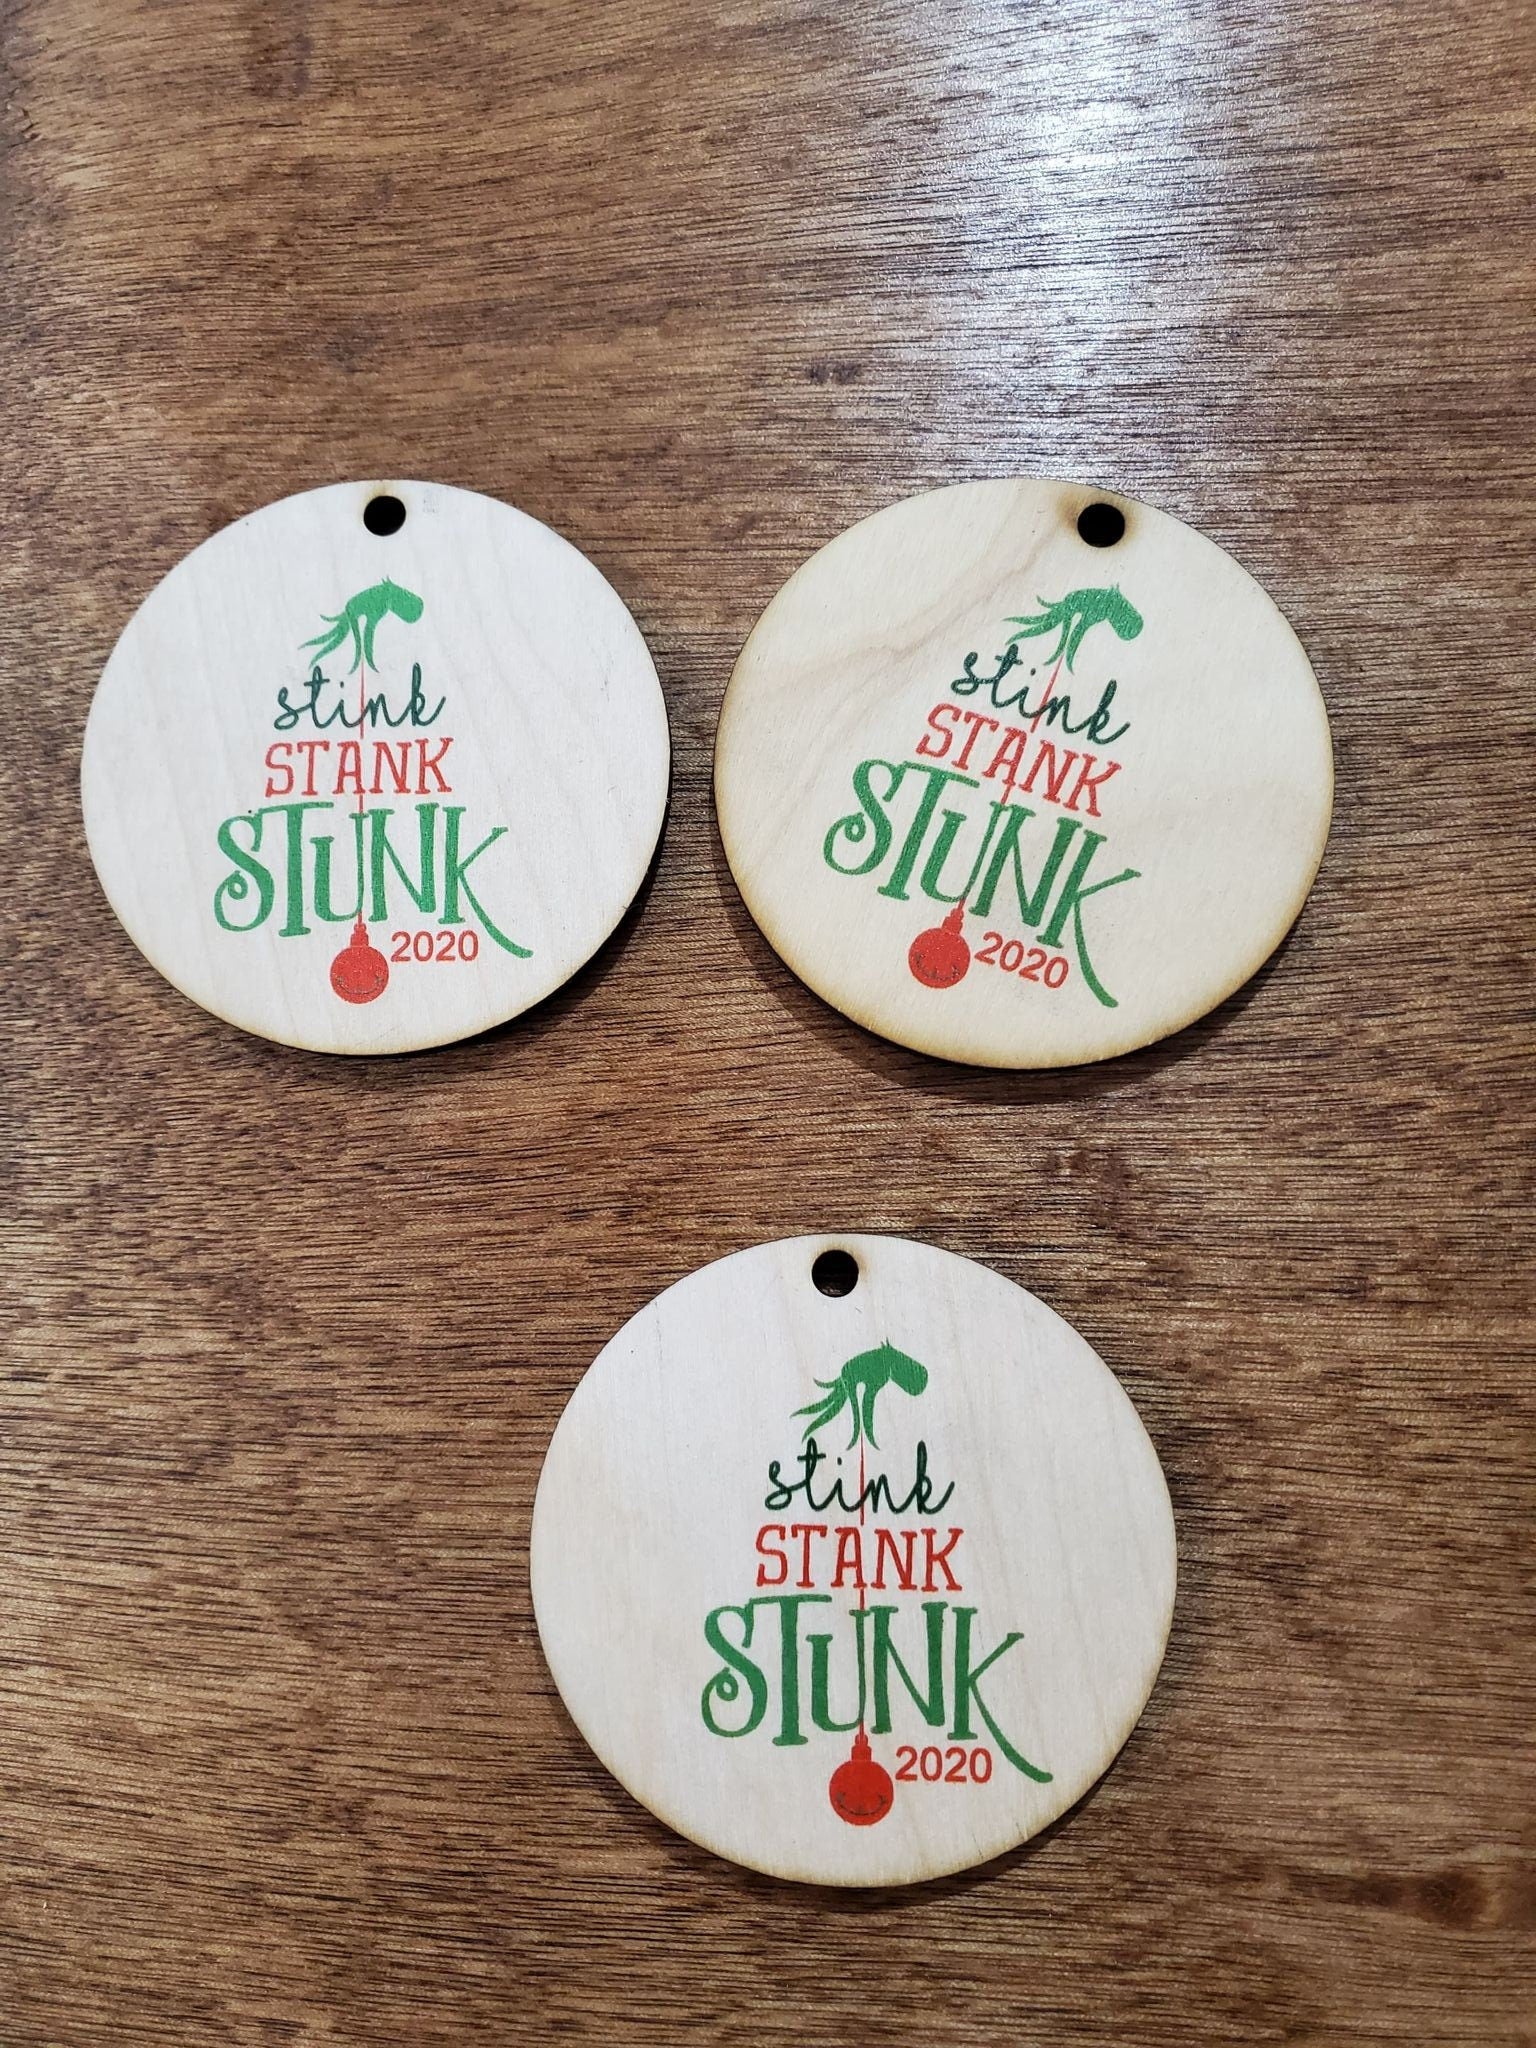 Set of 3 Stink Stank Stunk Ornament 2020 With Date Mean One Christmas Keychain Décor Wood Sign Tree Gift Cute Whoville Hand Green Festive